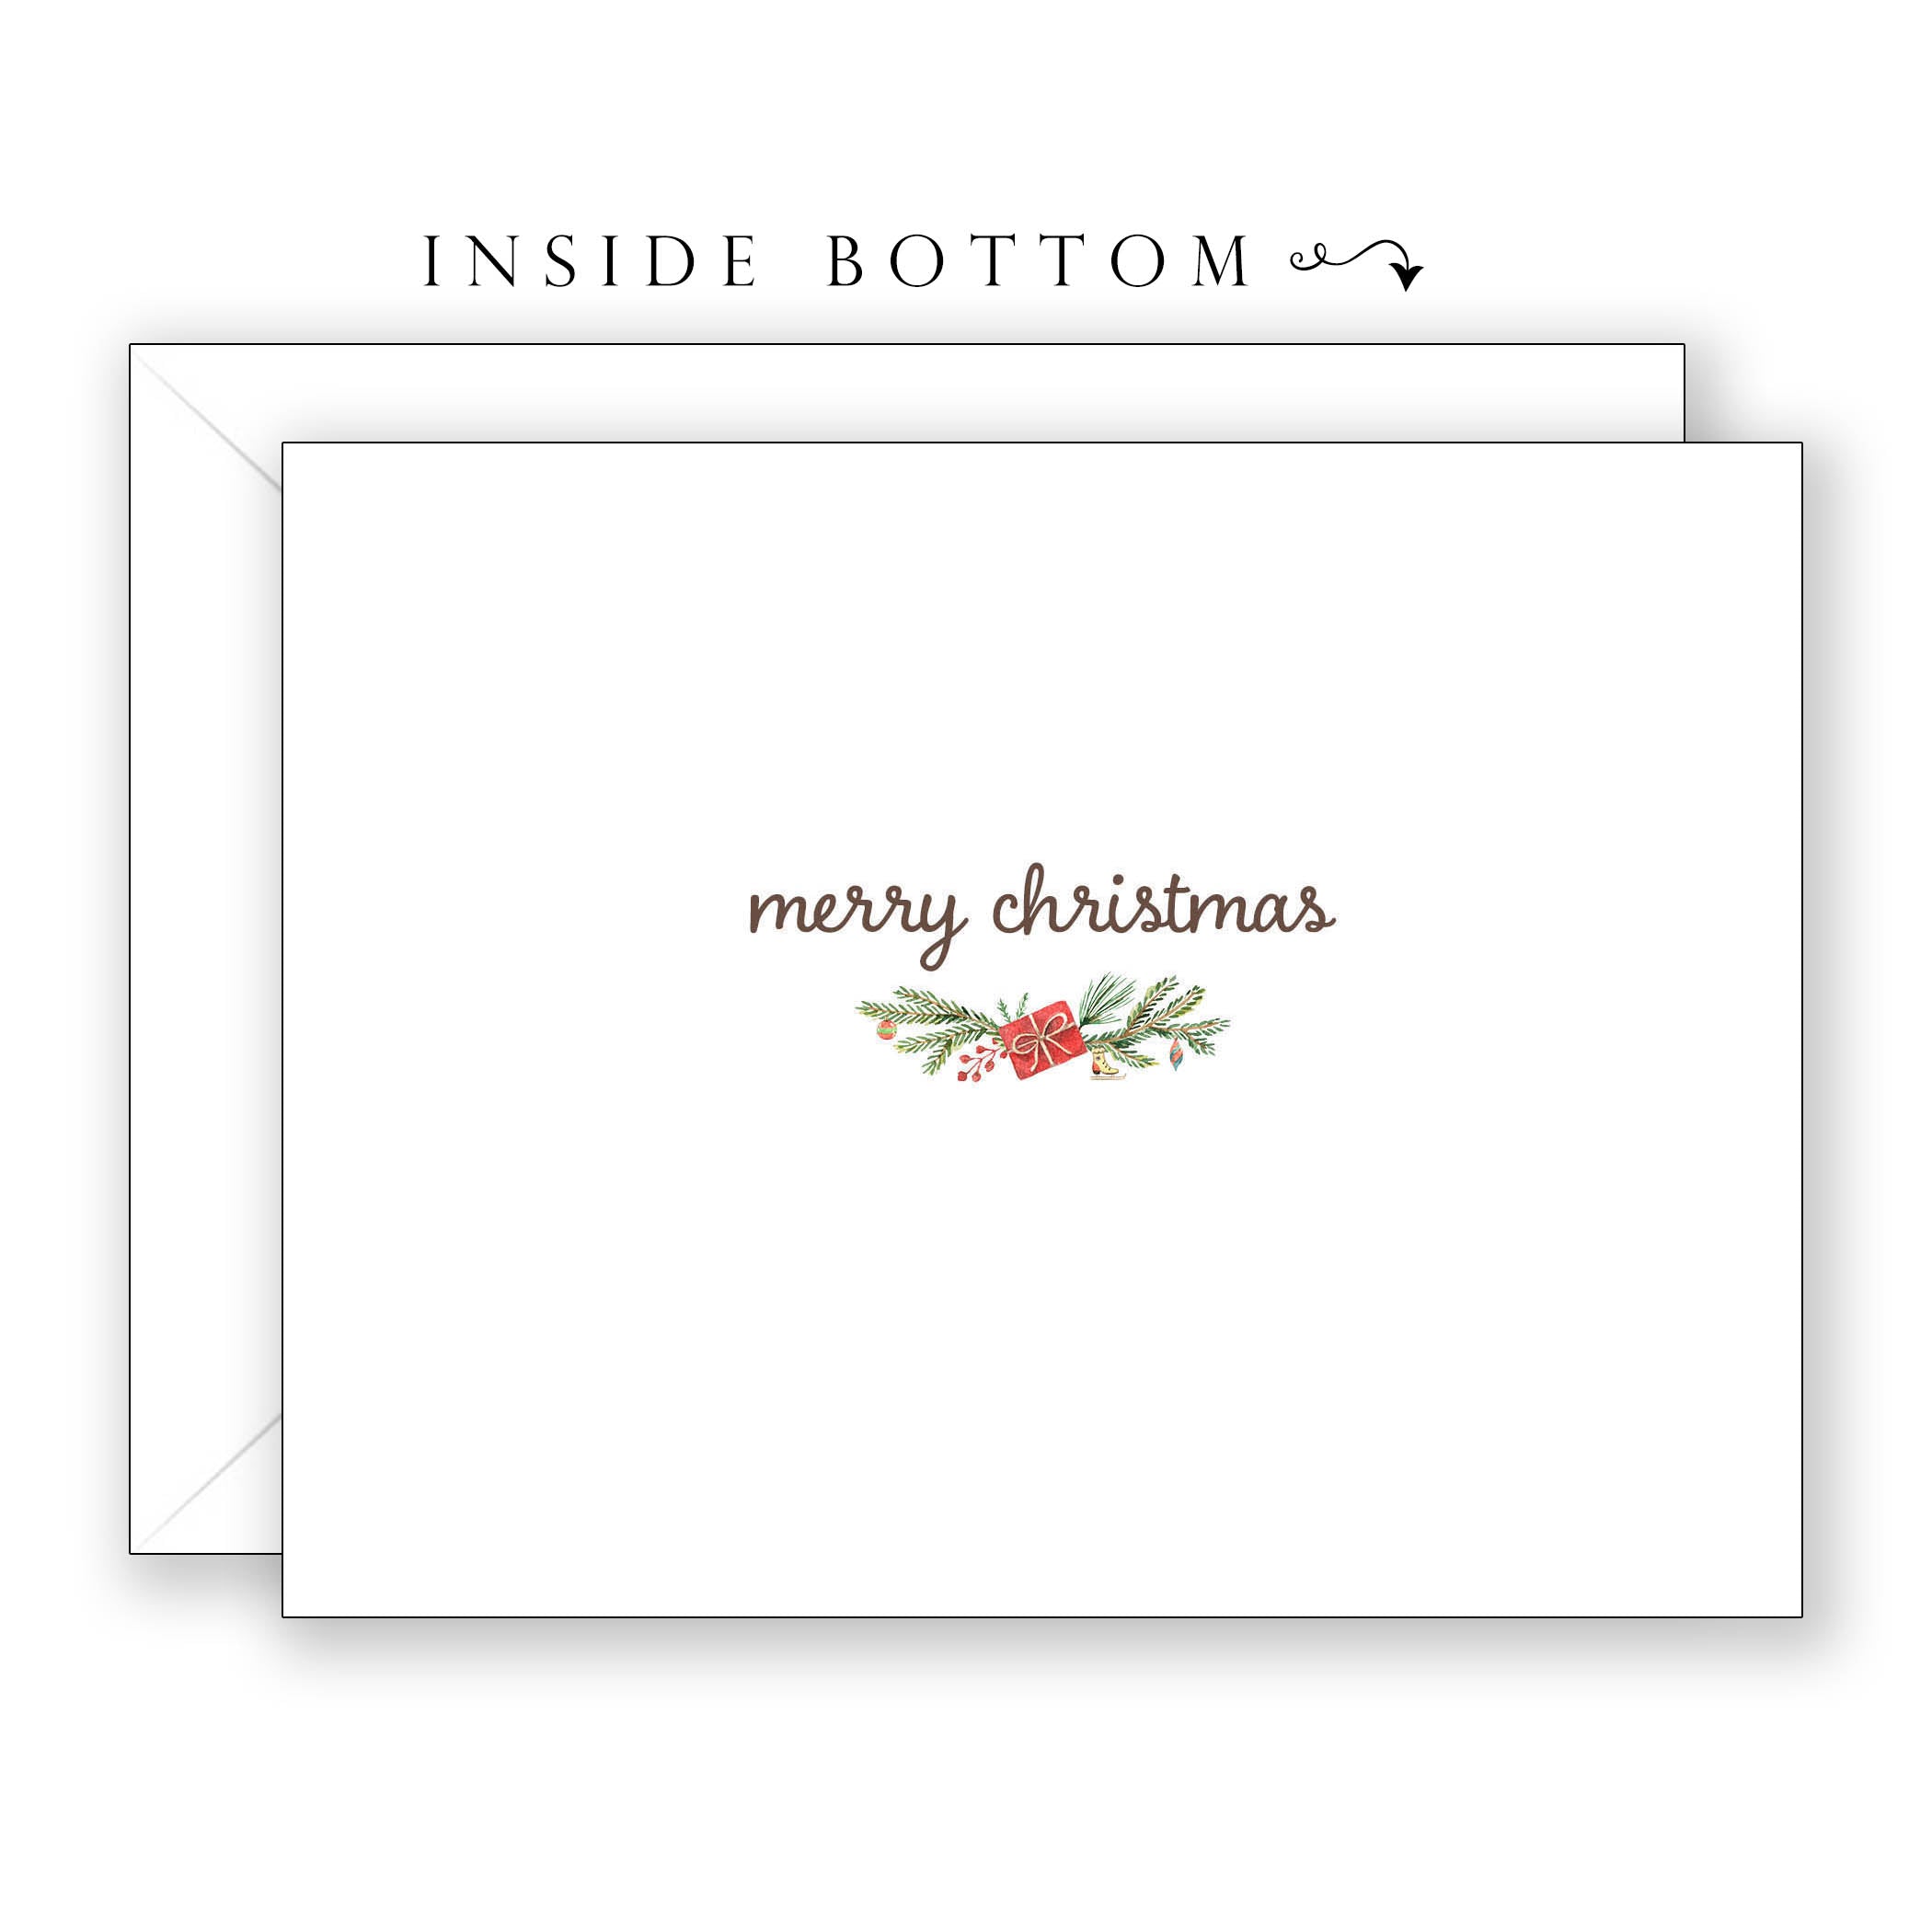 Holy Night (1 John 4:9) - Boxed Notecard Collection